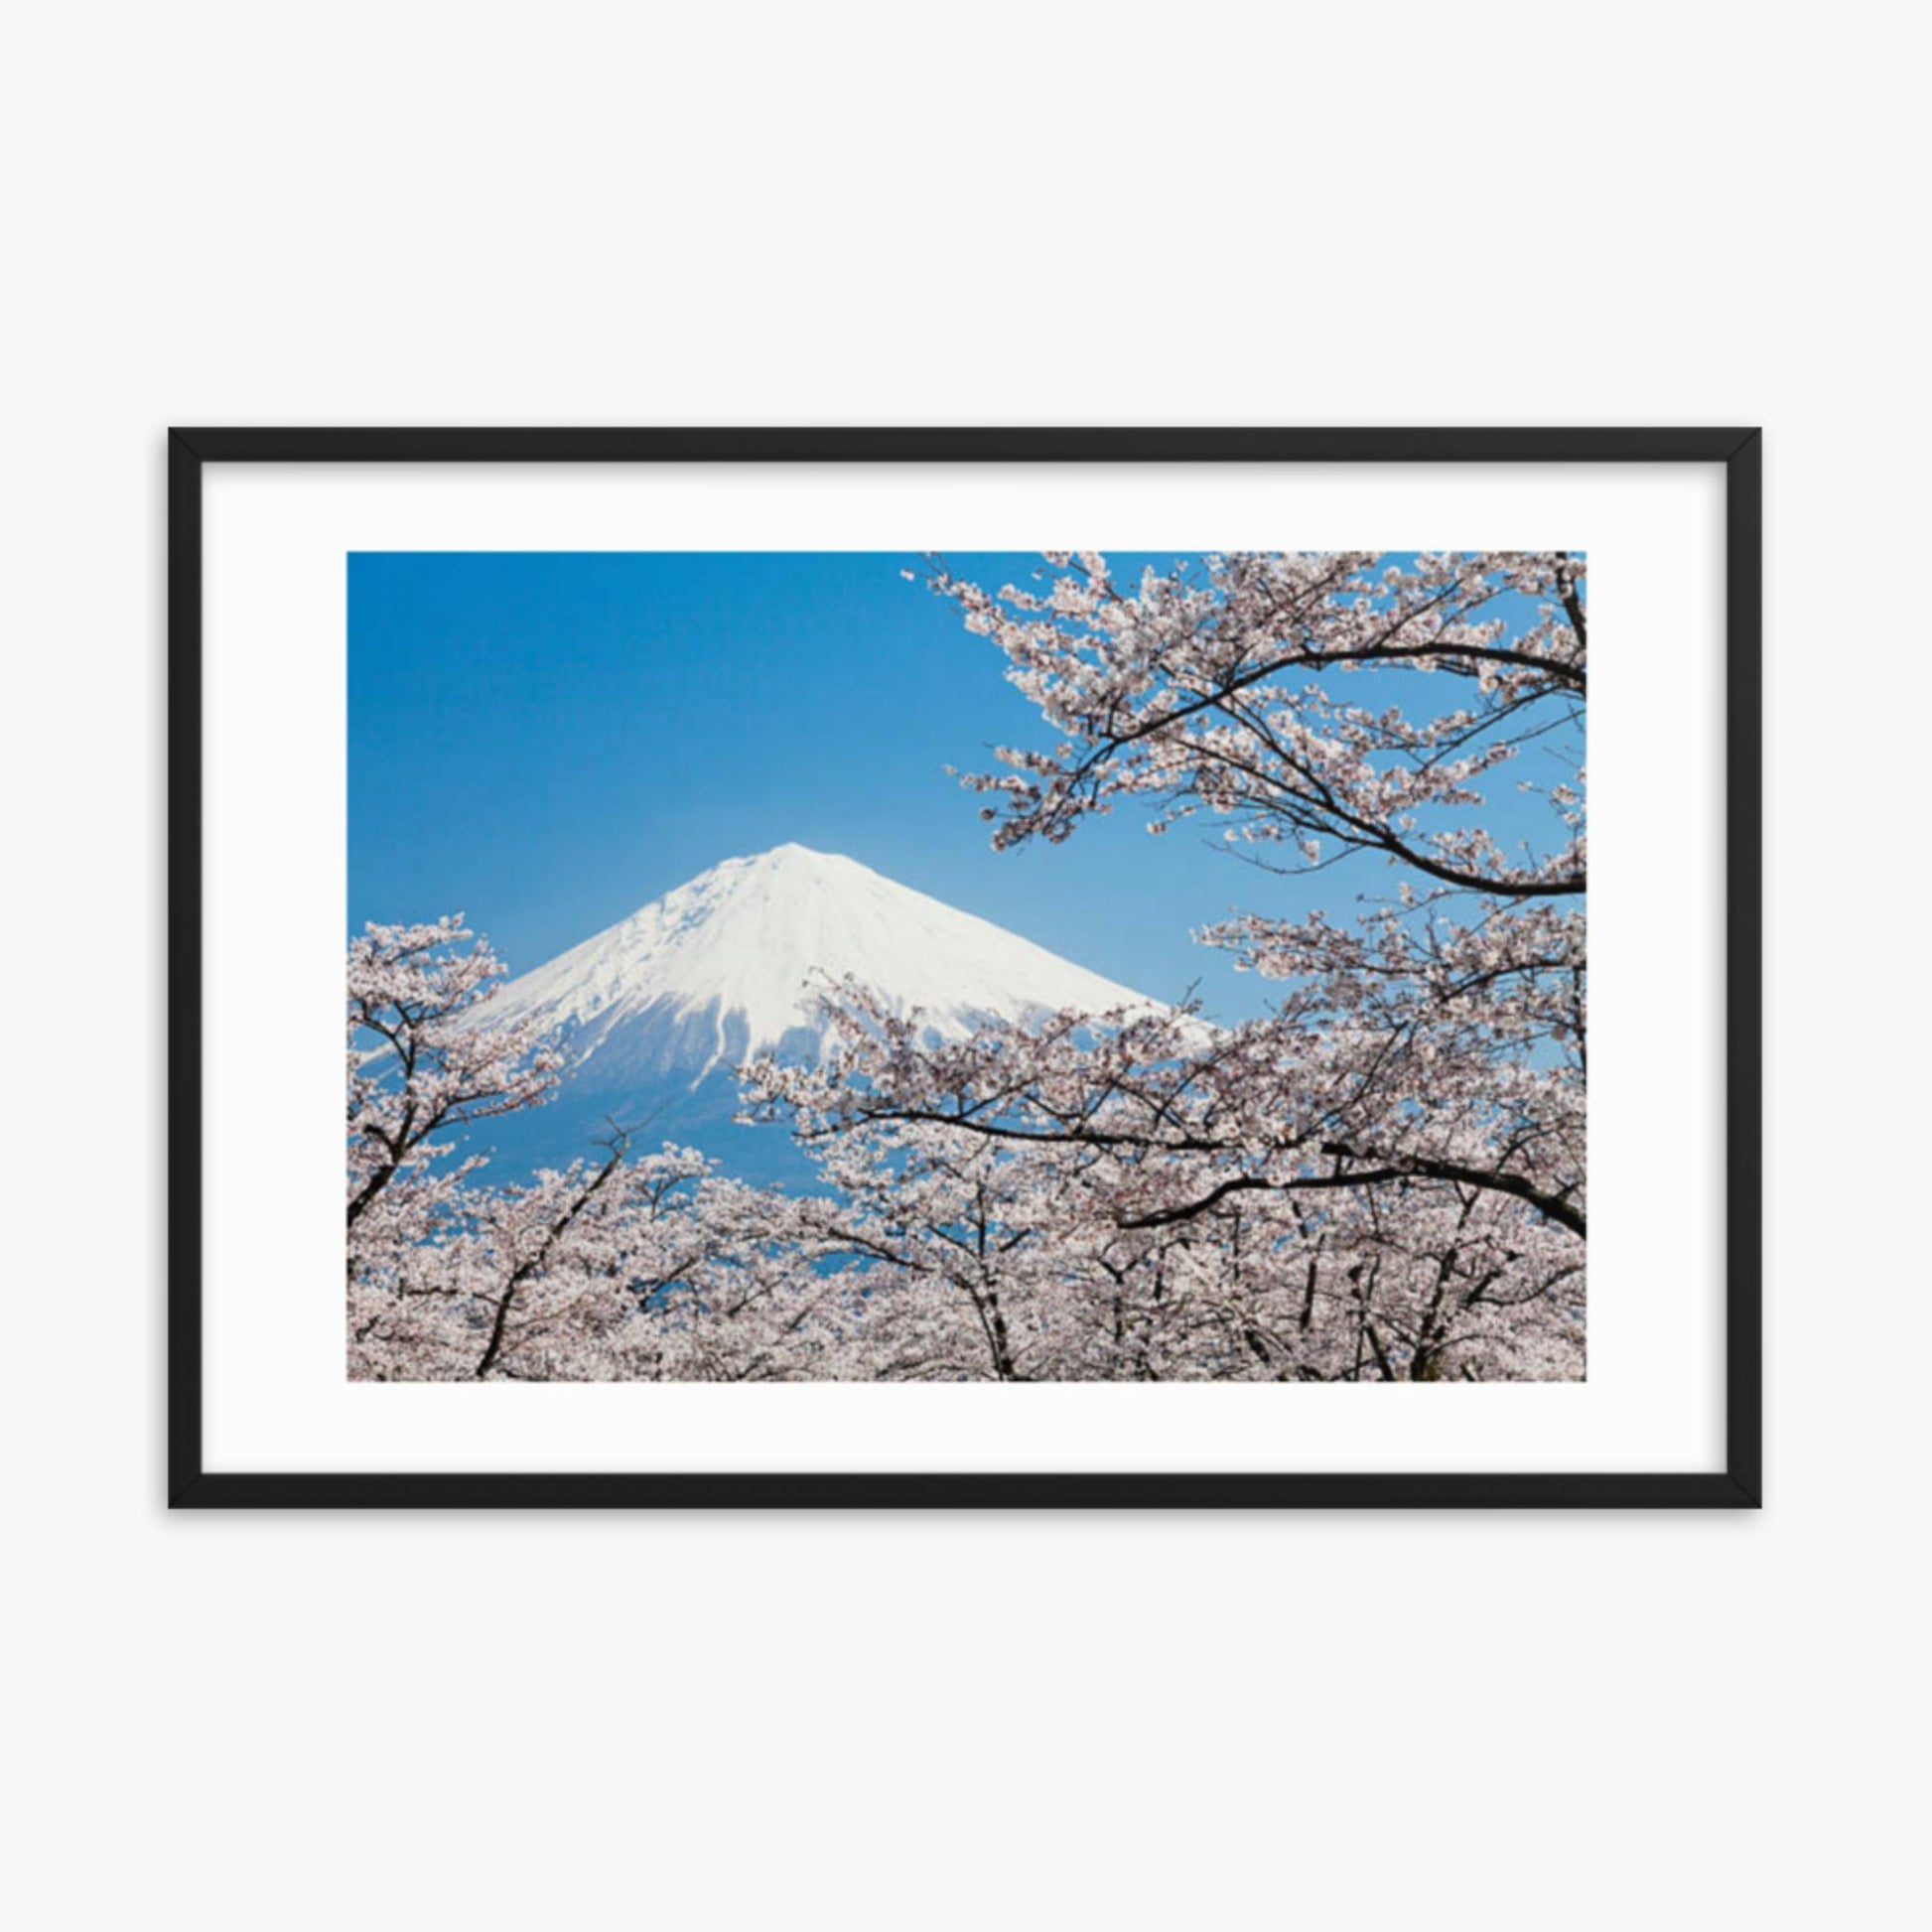 Mount Fuji & Cherry Blossoms 24x36 in Poster With Black Frame